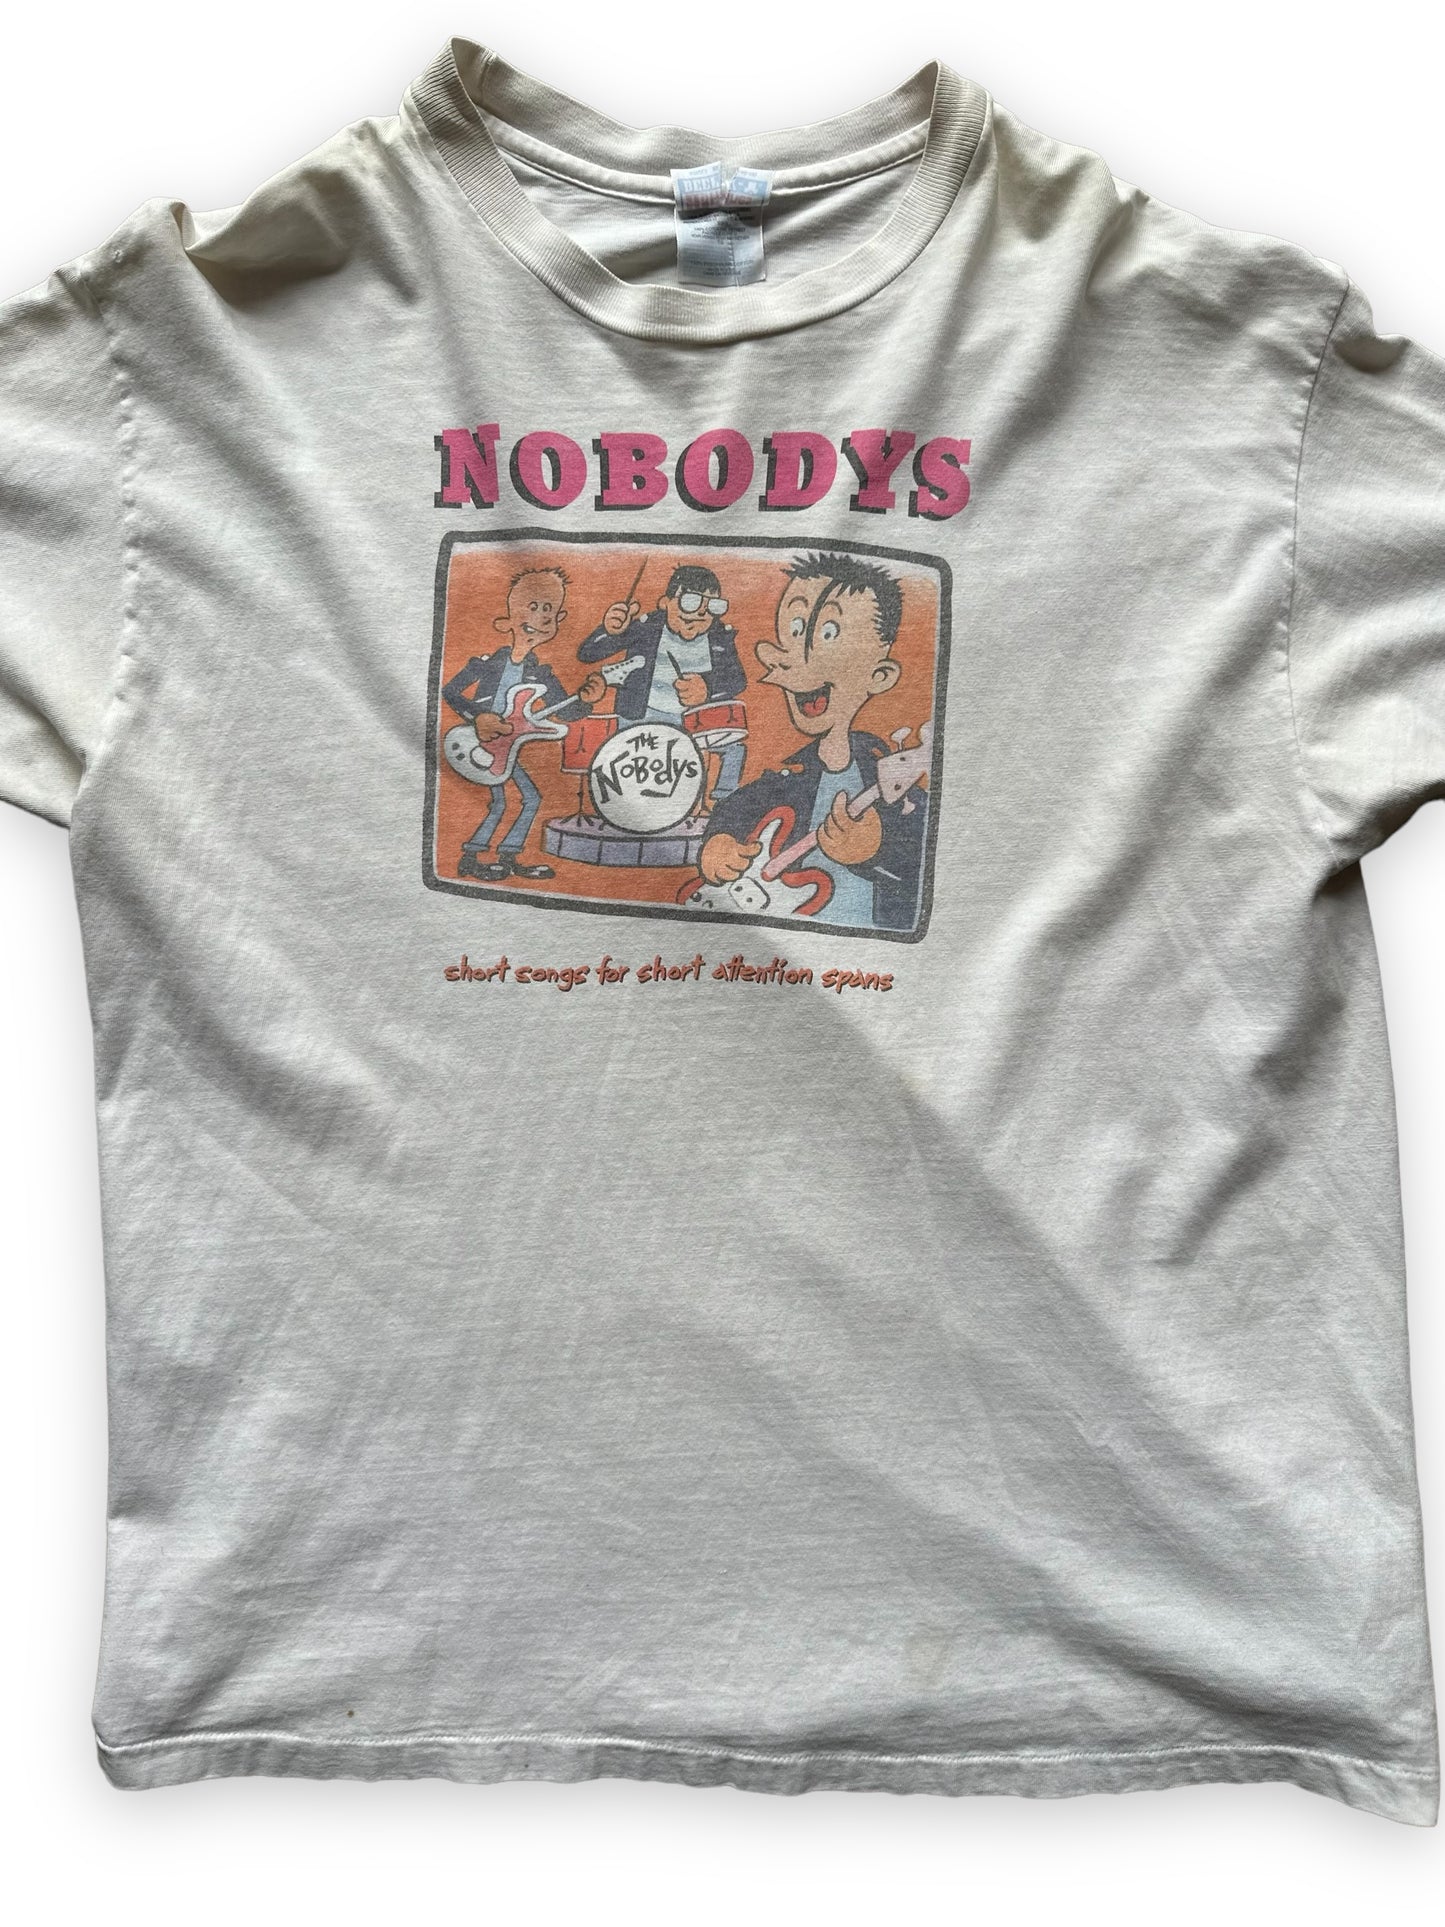 Front View Graphic on Vintage The Nobodys Short Songs For Short Attention Spans Tee SZ XL |  Hopeless Records Rock Tee | Barn Owl Vintage Seattle